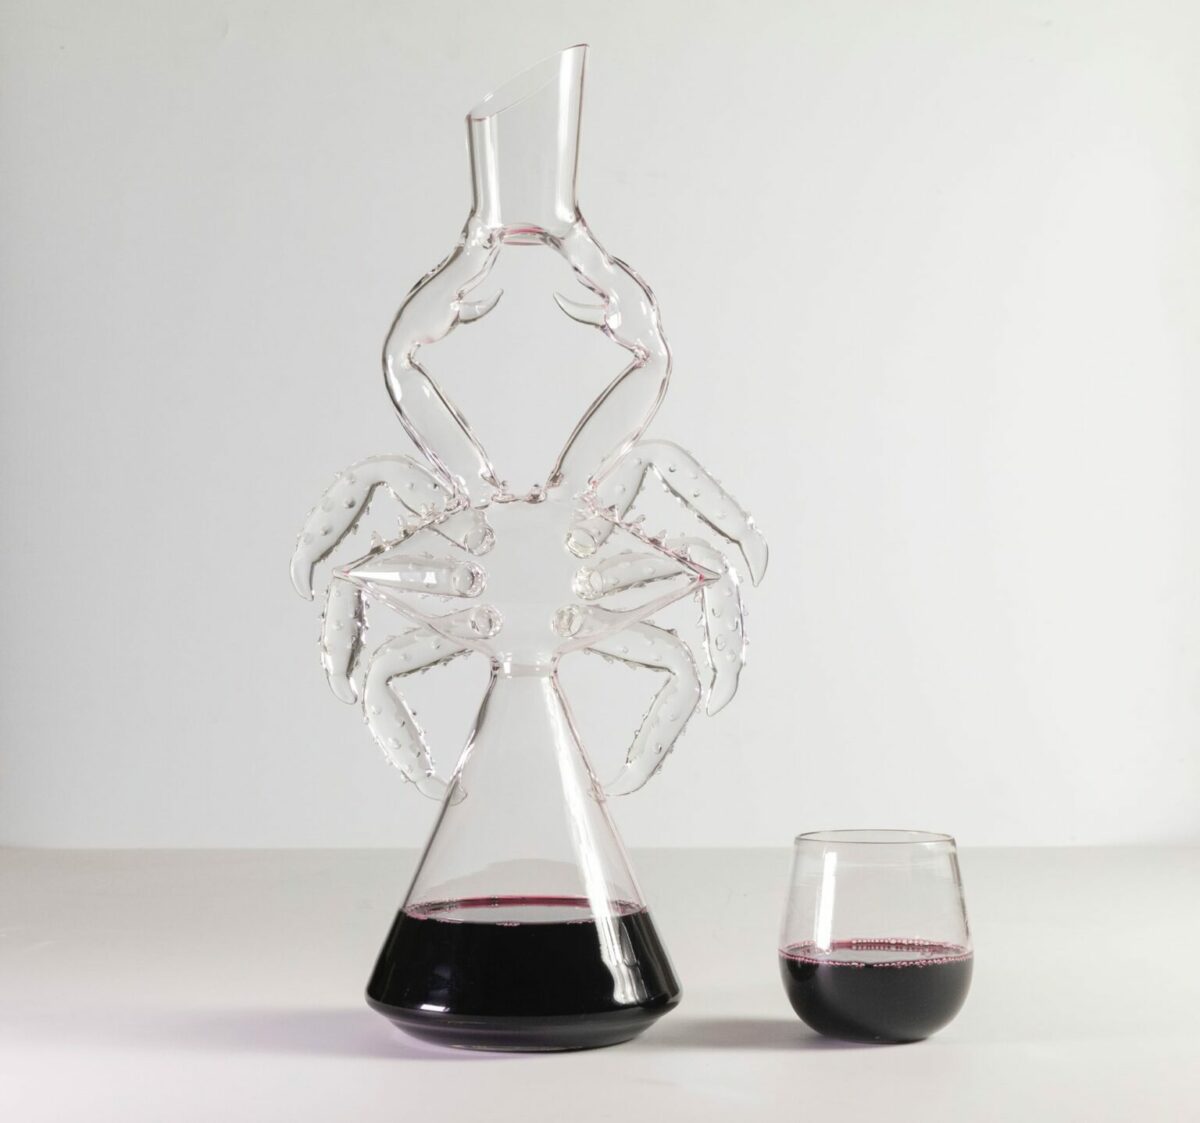 Fantastic Sculptural Wine Decanters In The Form Of Sea Creatures By Charlie Matz 1